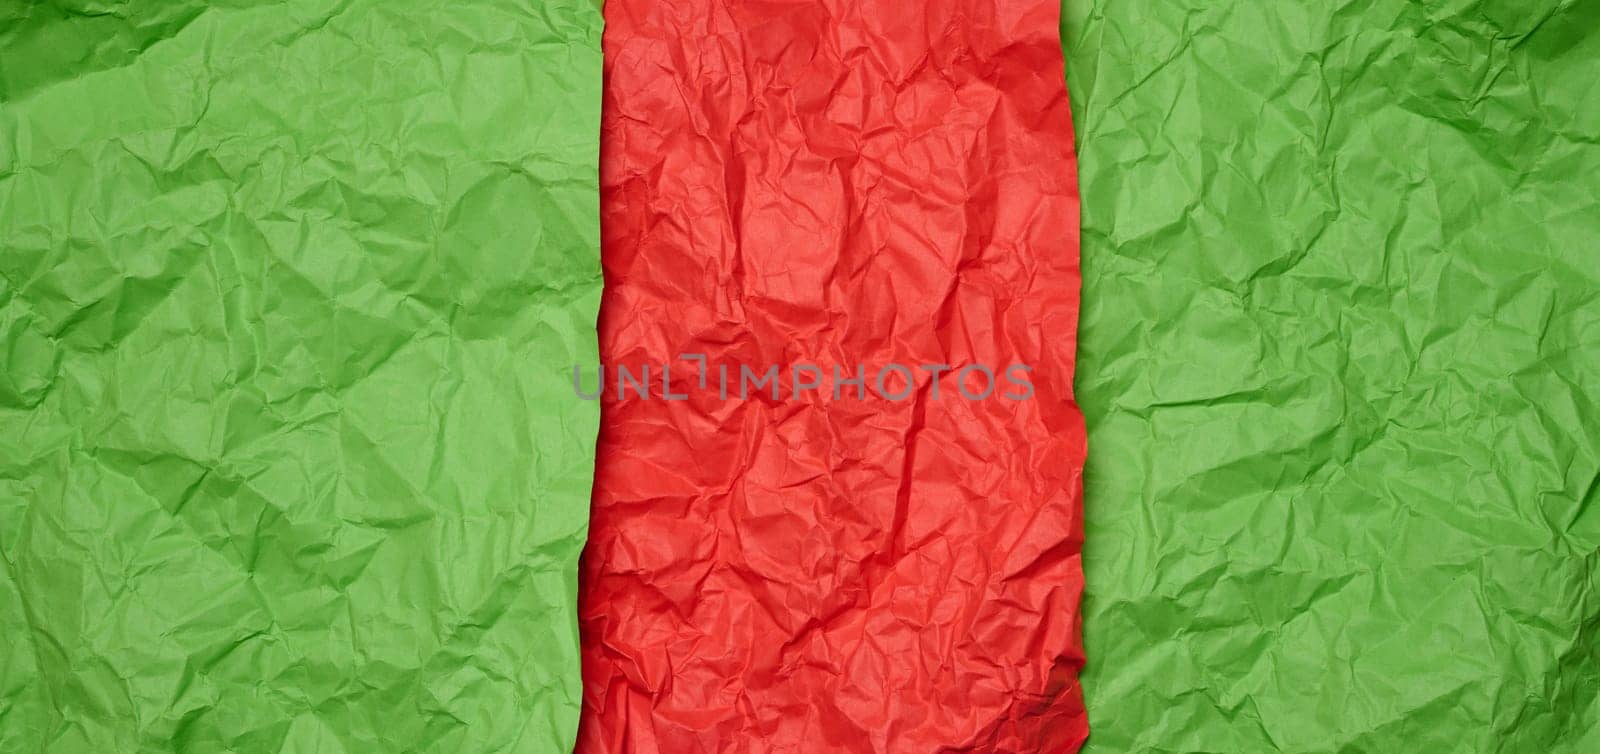 Crumpled red and green paper sheets, paper texture. Background for designers by ndanko